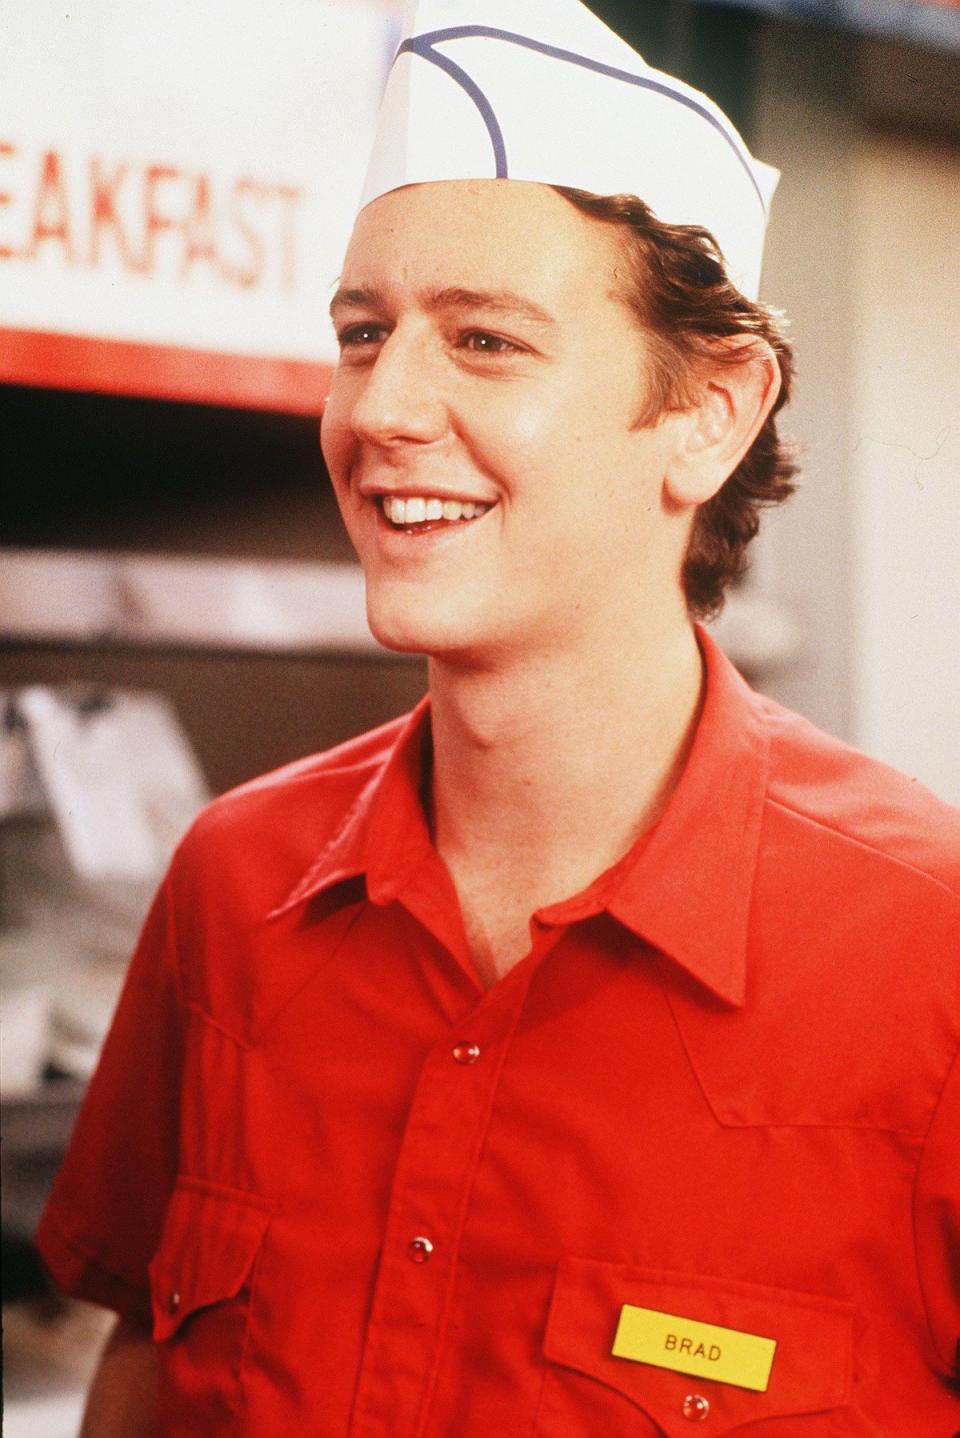 The actor broke out as Brad in ‘Fast Times at Ridgemont High’ (Universal/Kobal/Shutterstock)